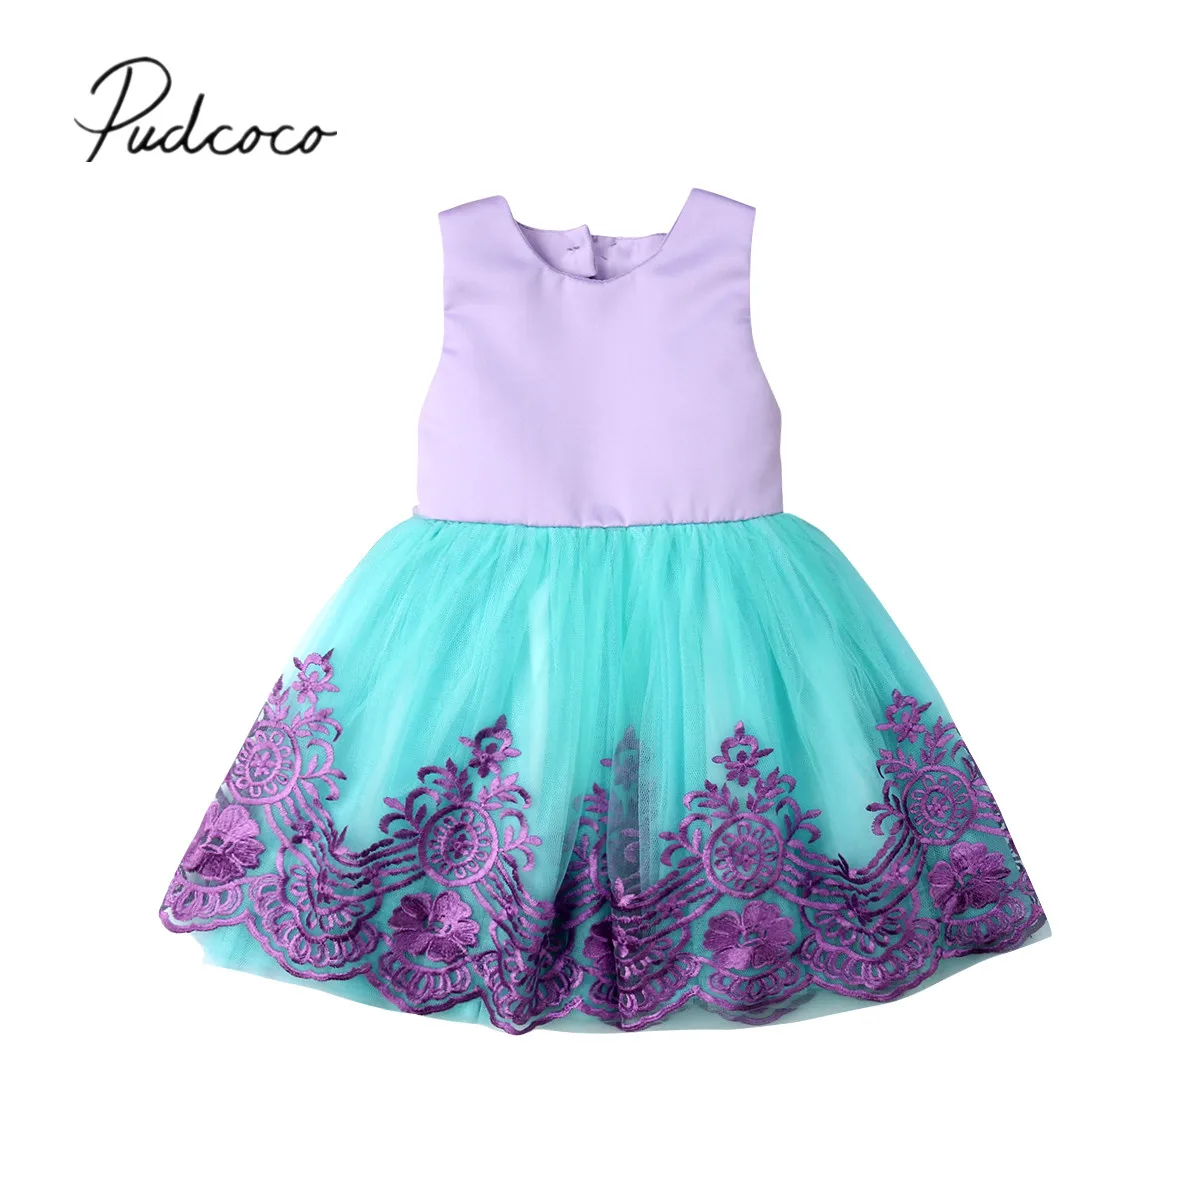 

2019 Children Summer Clothing Flower Kids Baby Girl Bow Pageant Party Princess Formal Gown Tutu Dress Lace Chiffon Costume 6M-5T